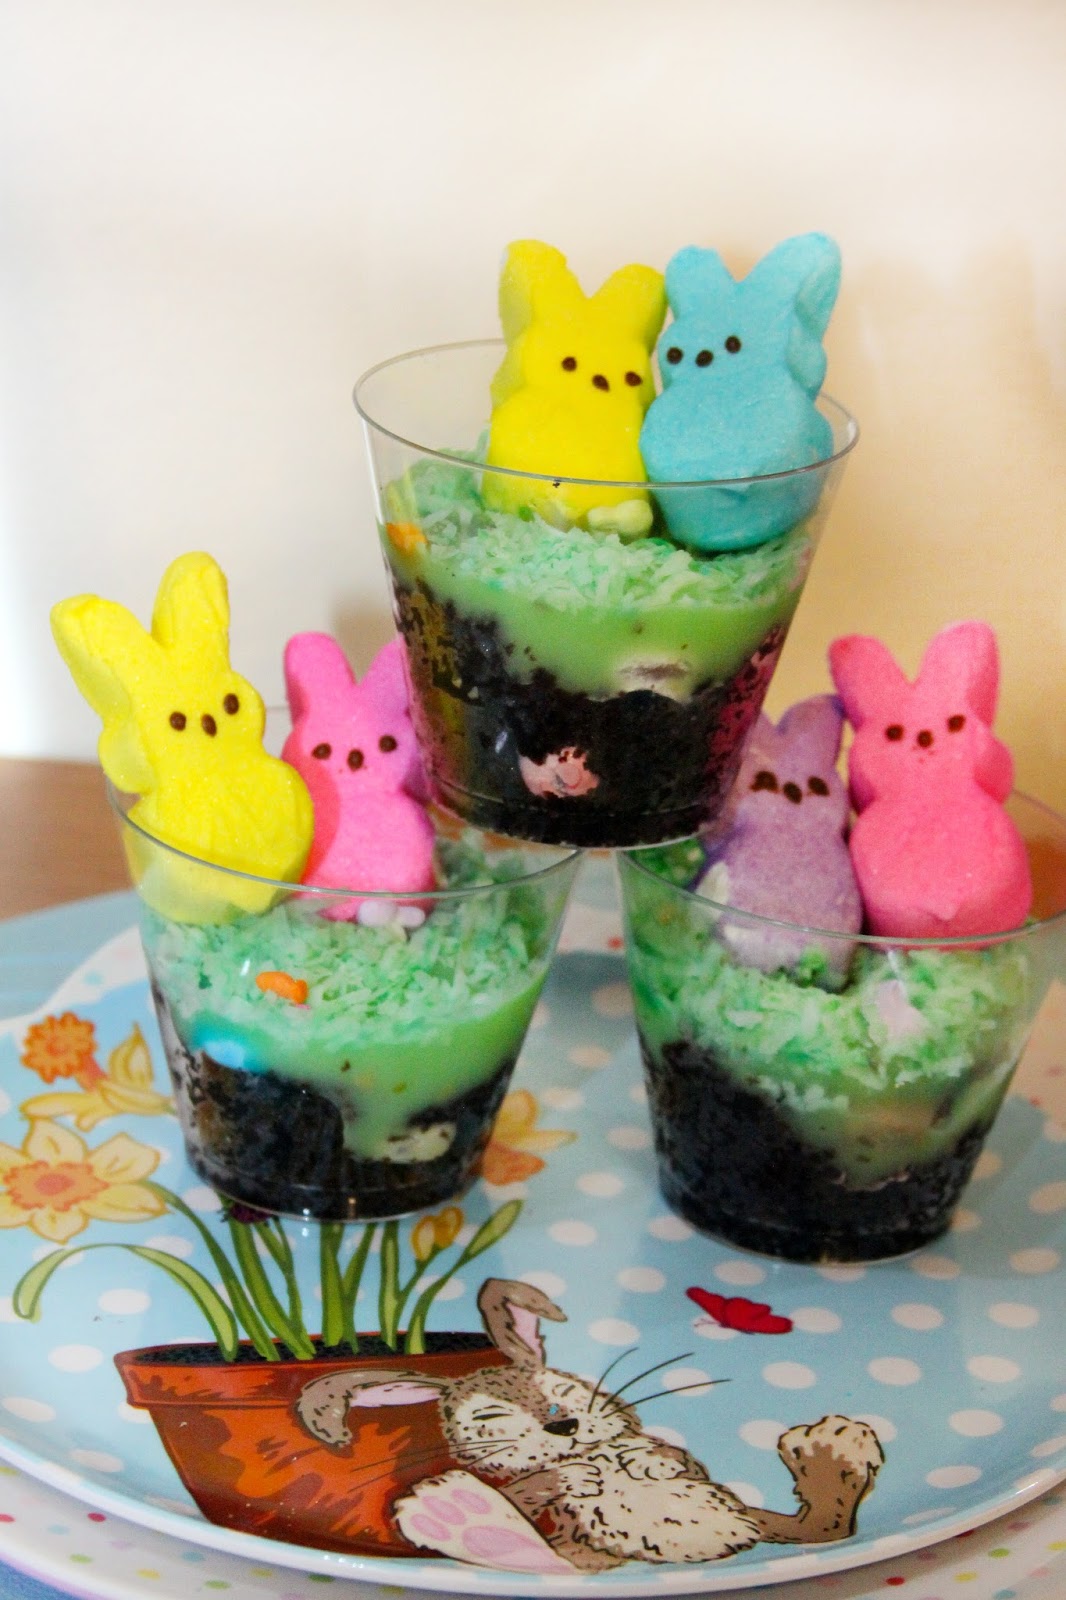 For the Love of Food: Peeps Easter Bunny Pudding Cups